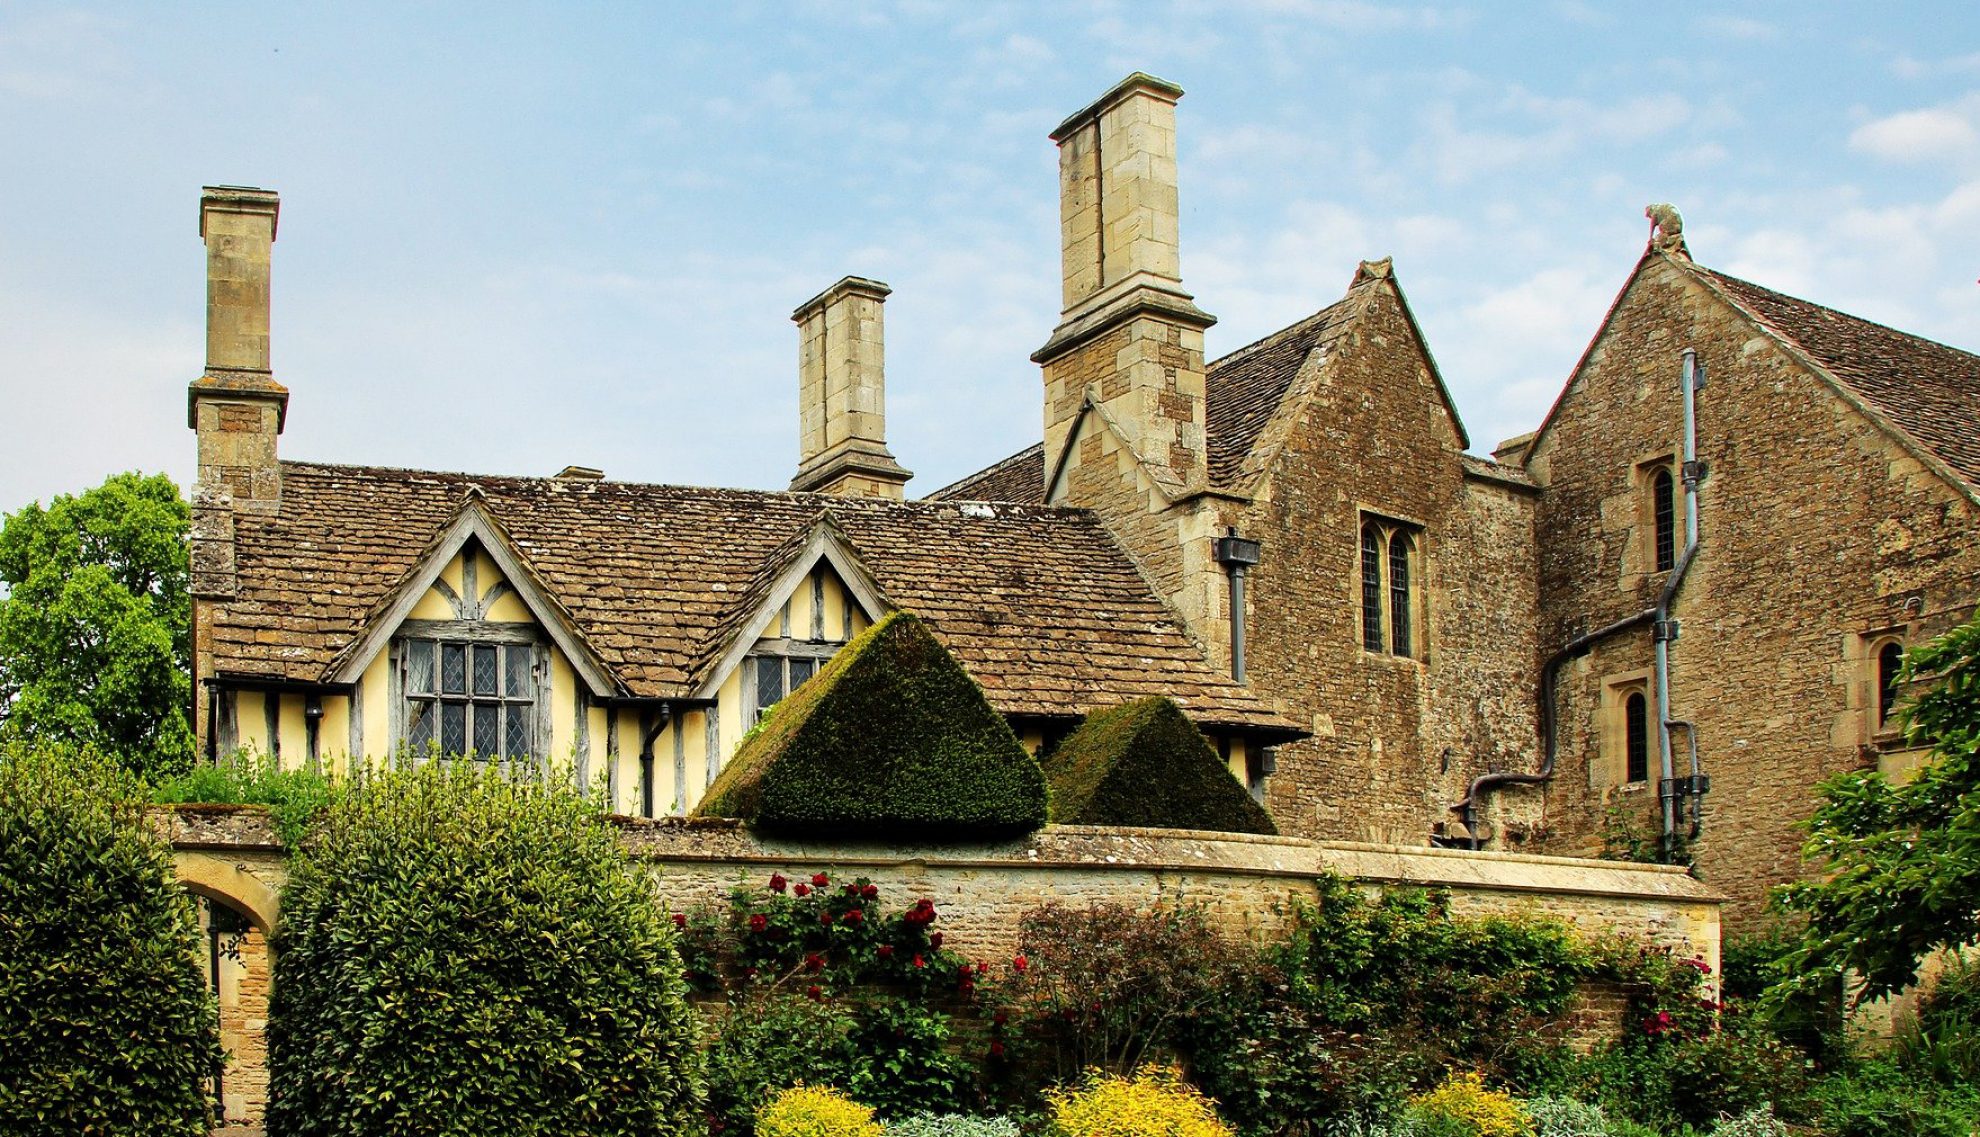 Grade 2 listed building Great Chalfield Manor House